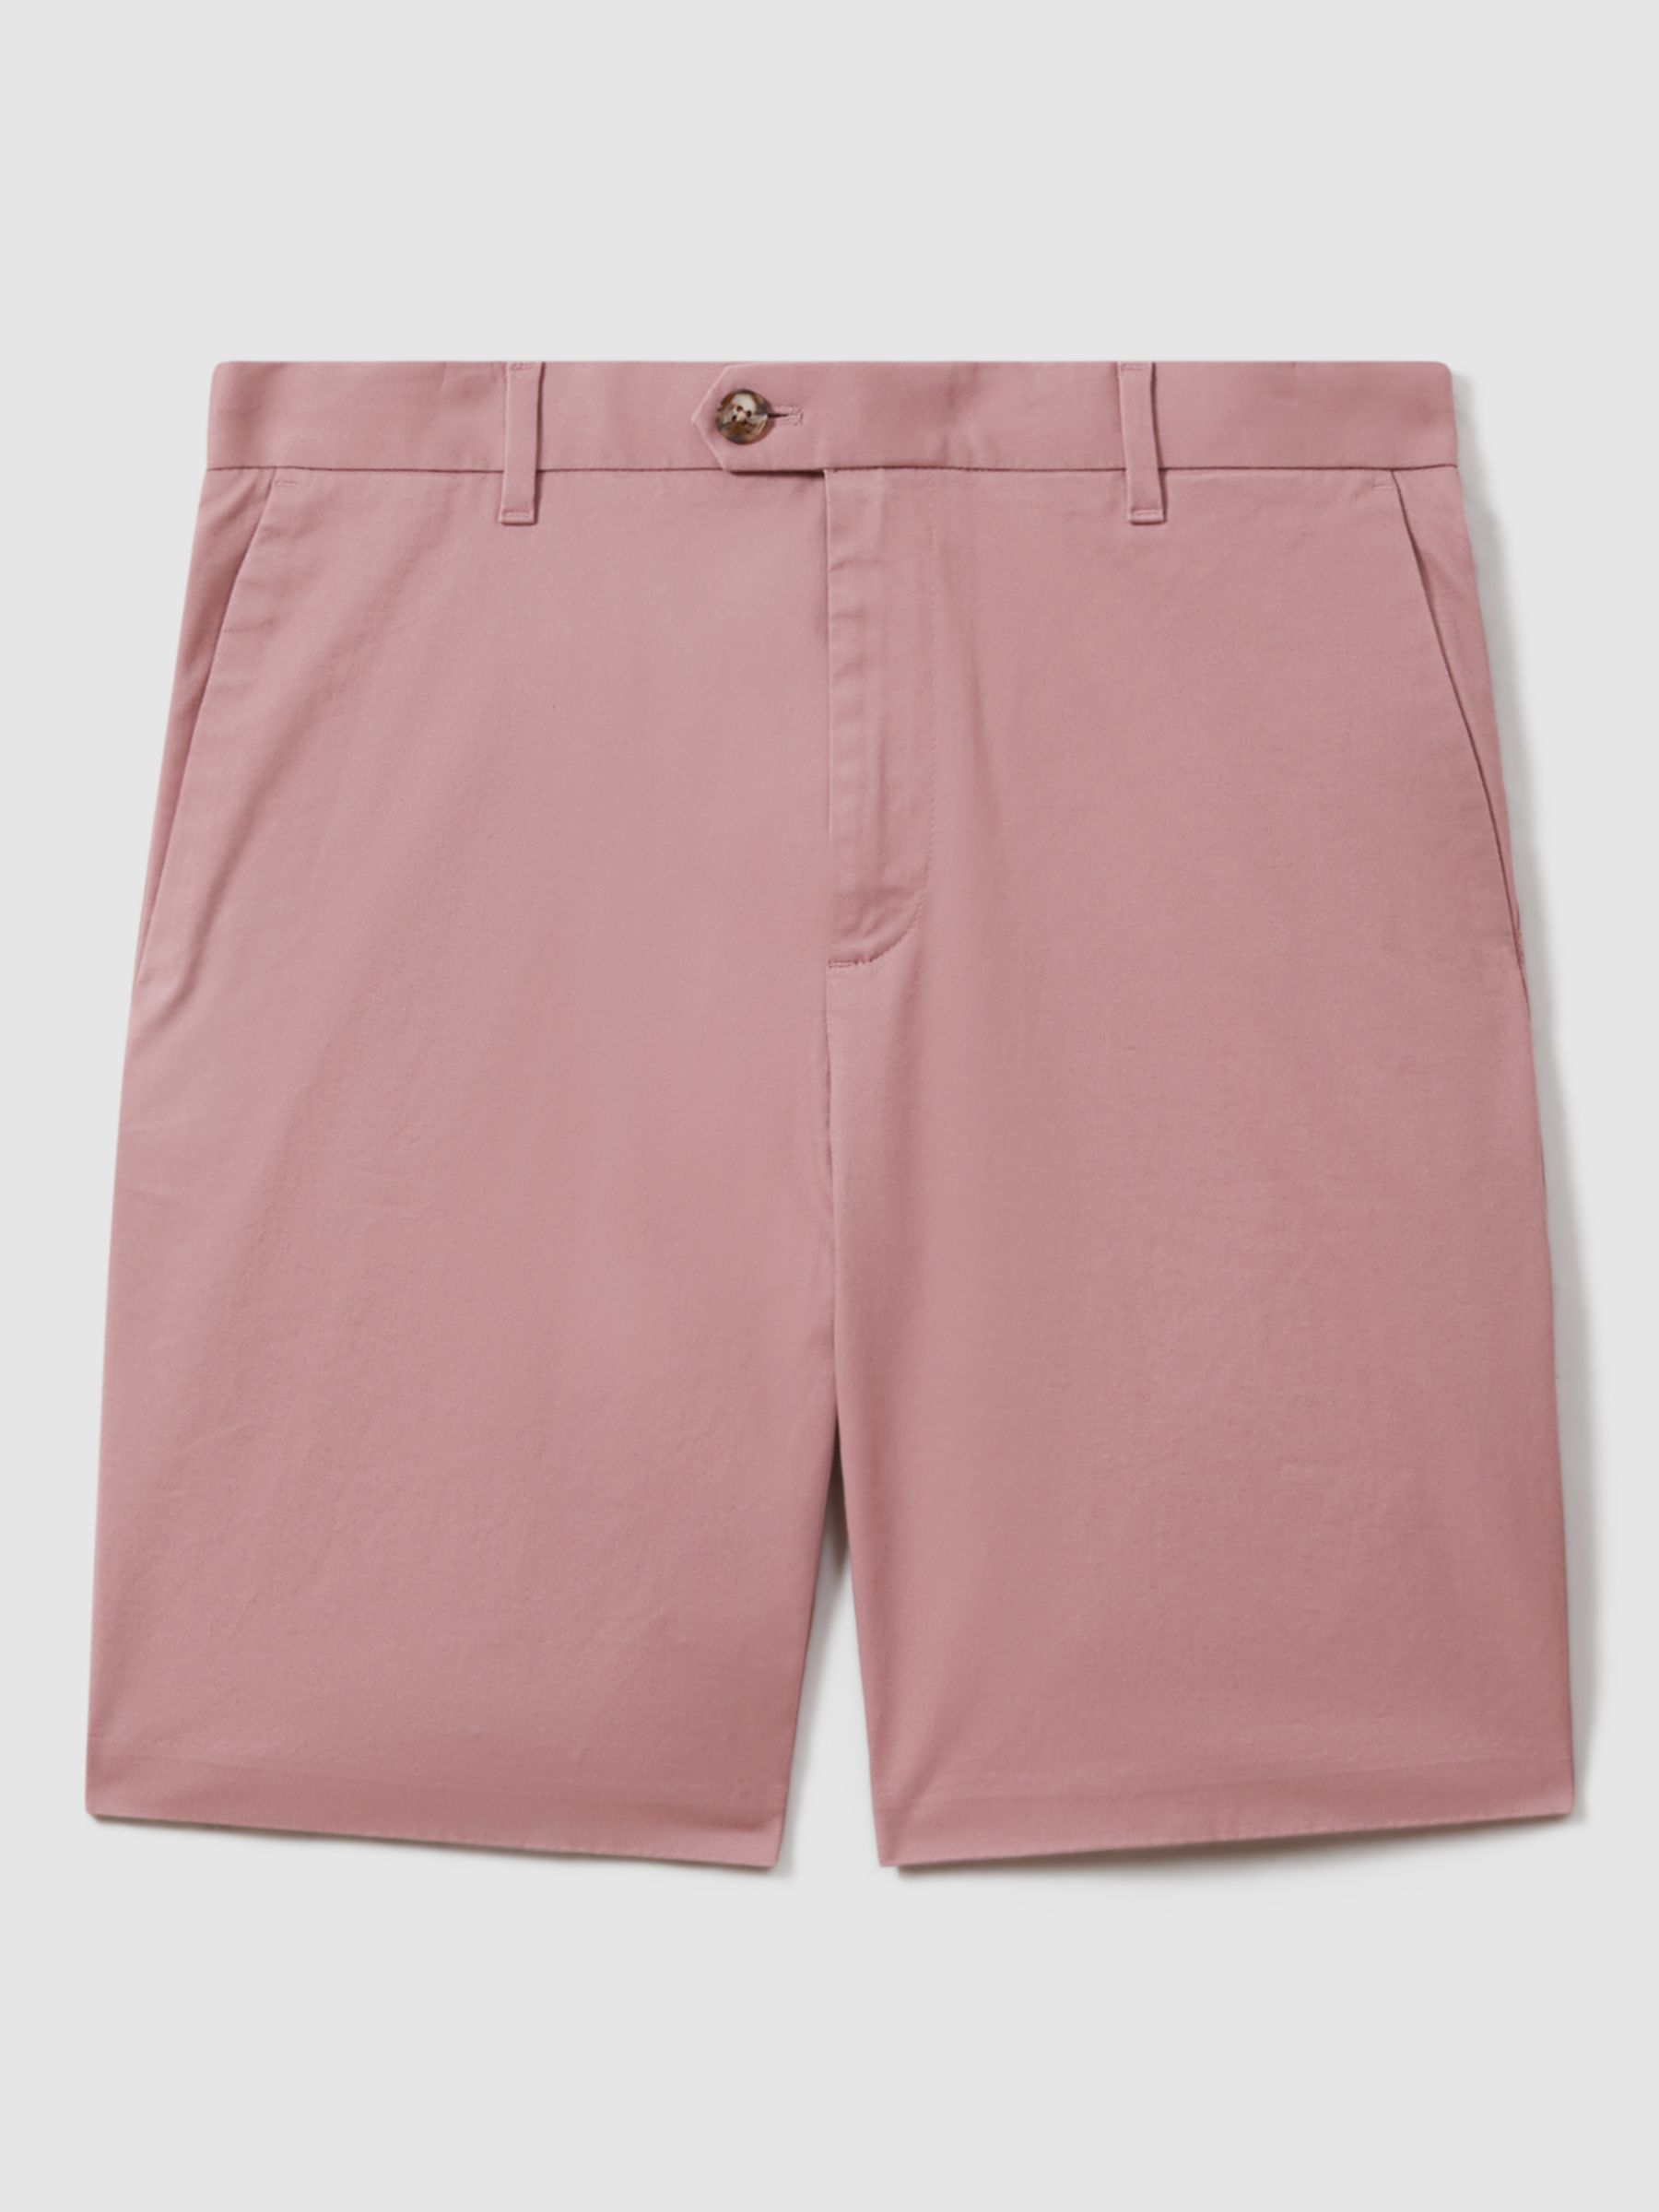 Buy Reiss Wicket Casual Chino Shorts Online at johnlewis.com